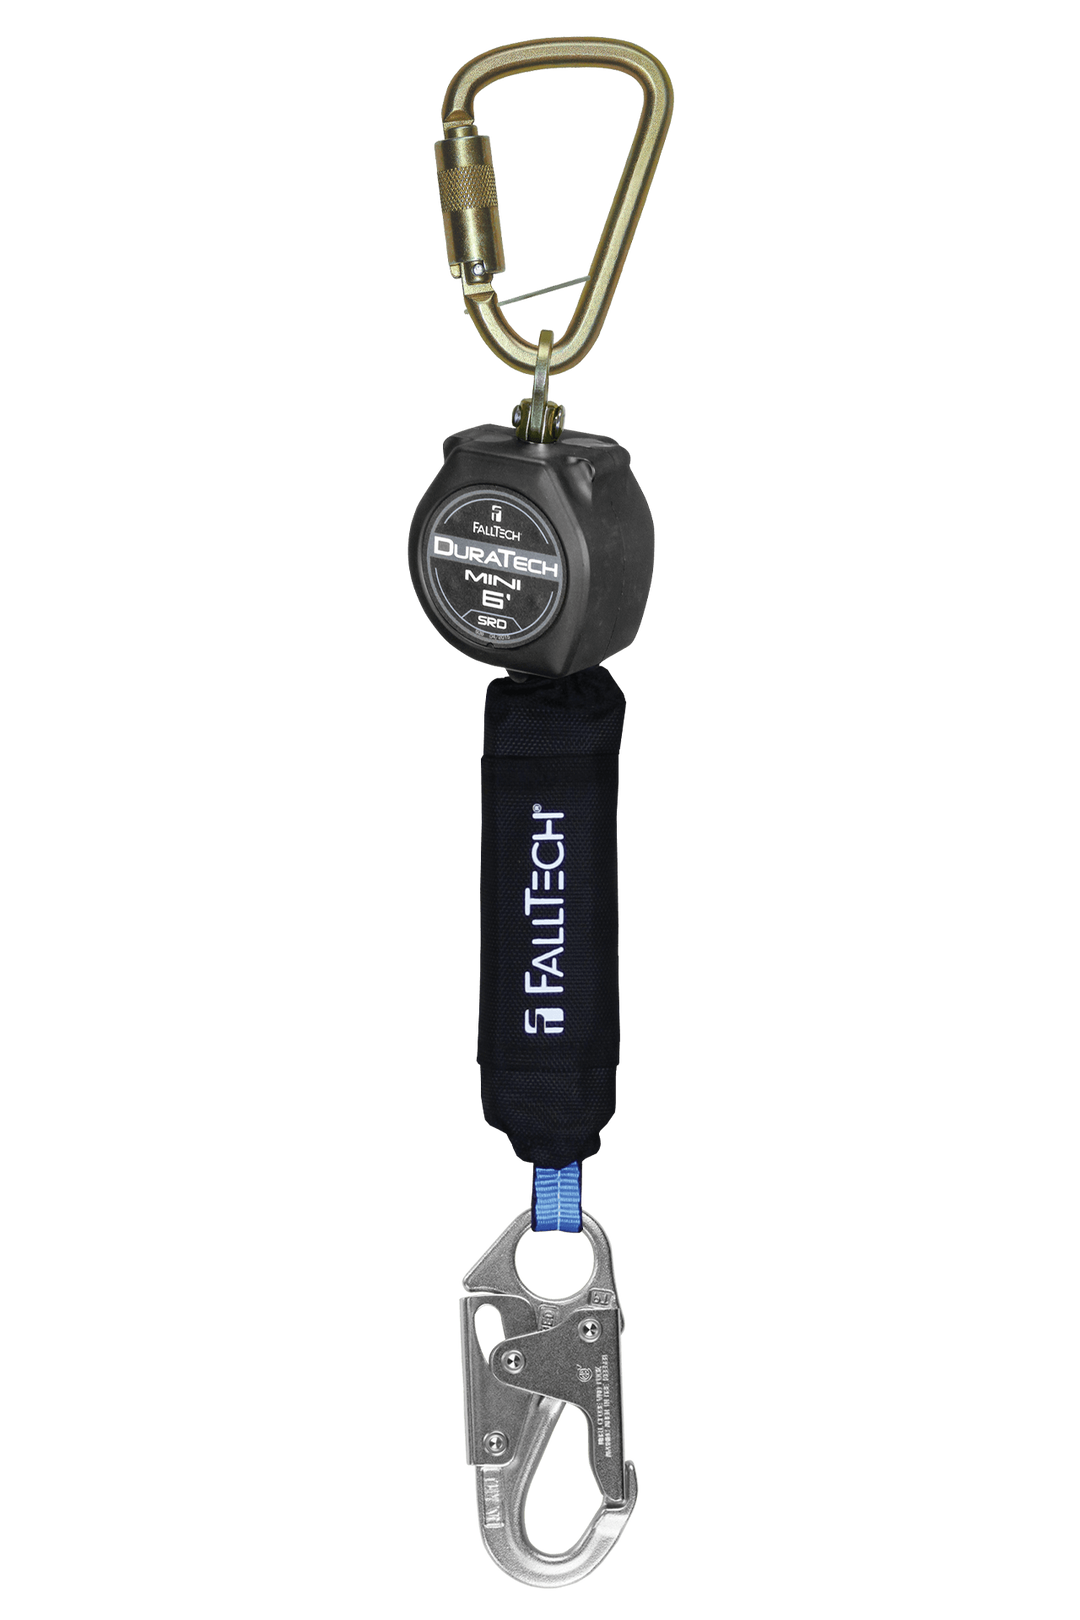 FALLTECH 6' DURATECH® Mini Class 1 Personal SRL-P w/ Steel Snap Hook, Includes Steel Dorsal Connecting Carabiner